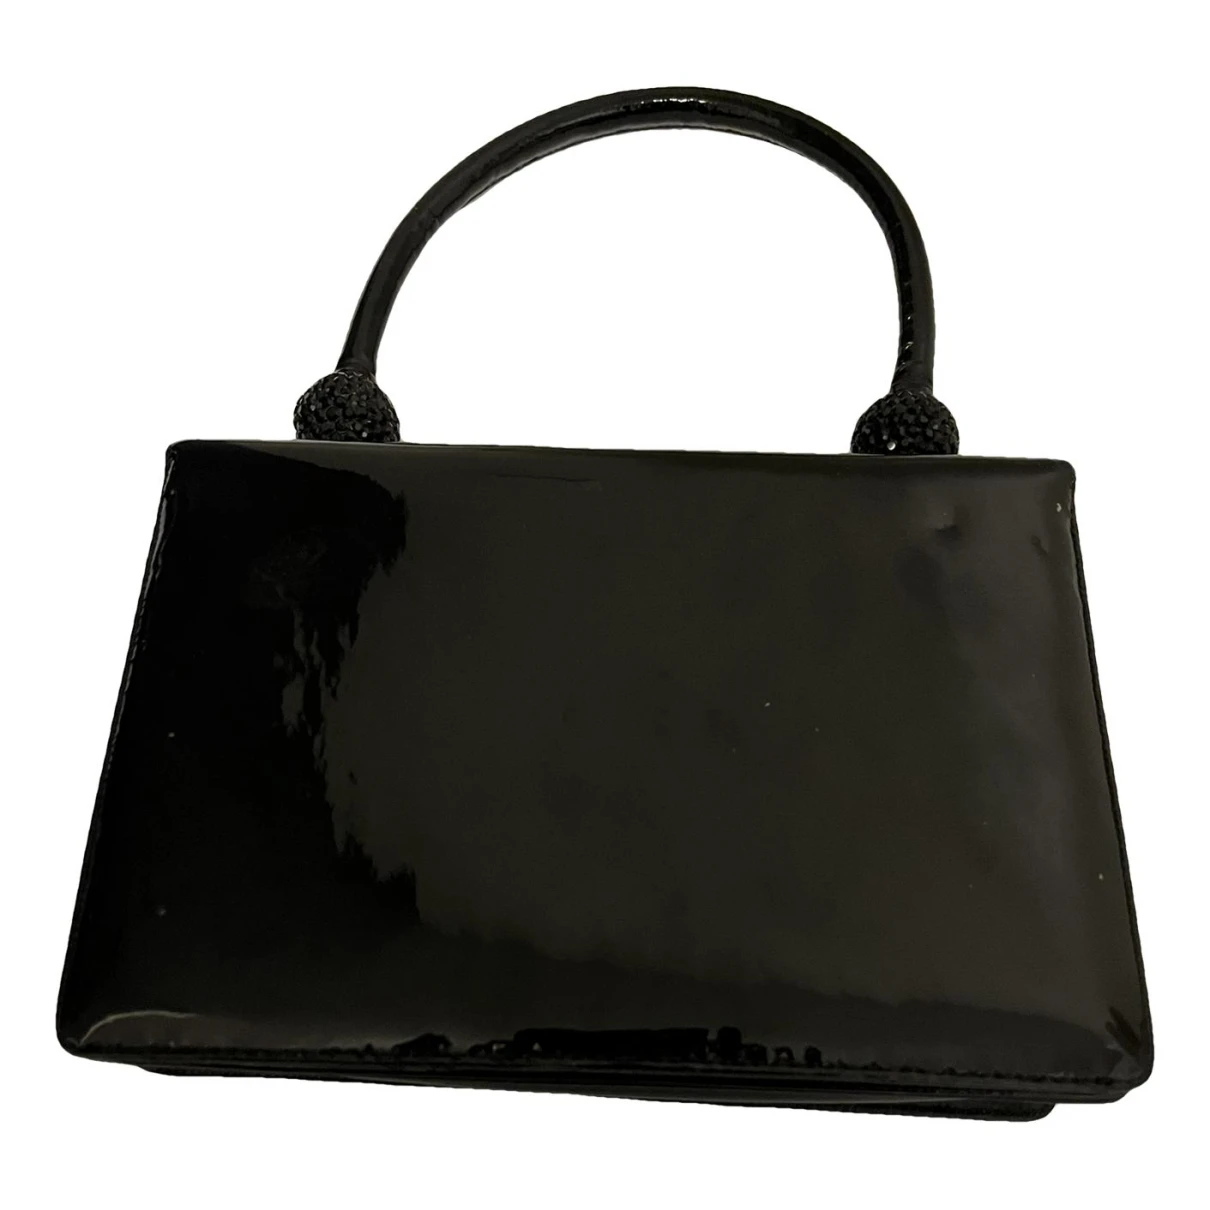 Pre-owned Judith Leiber Patent Leather Handbag In Black